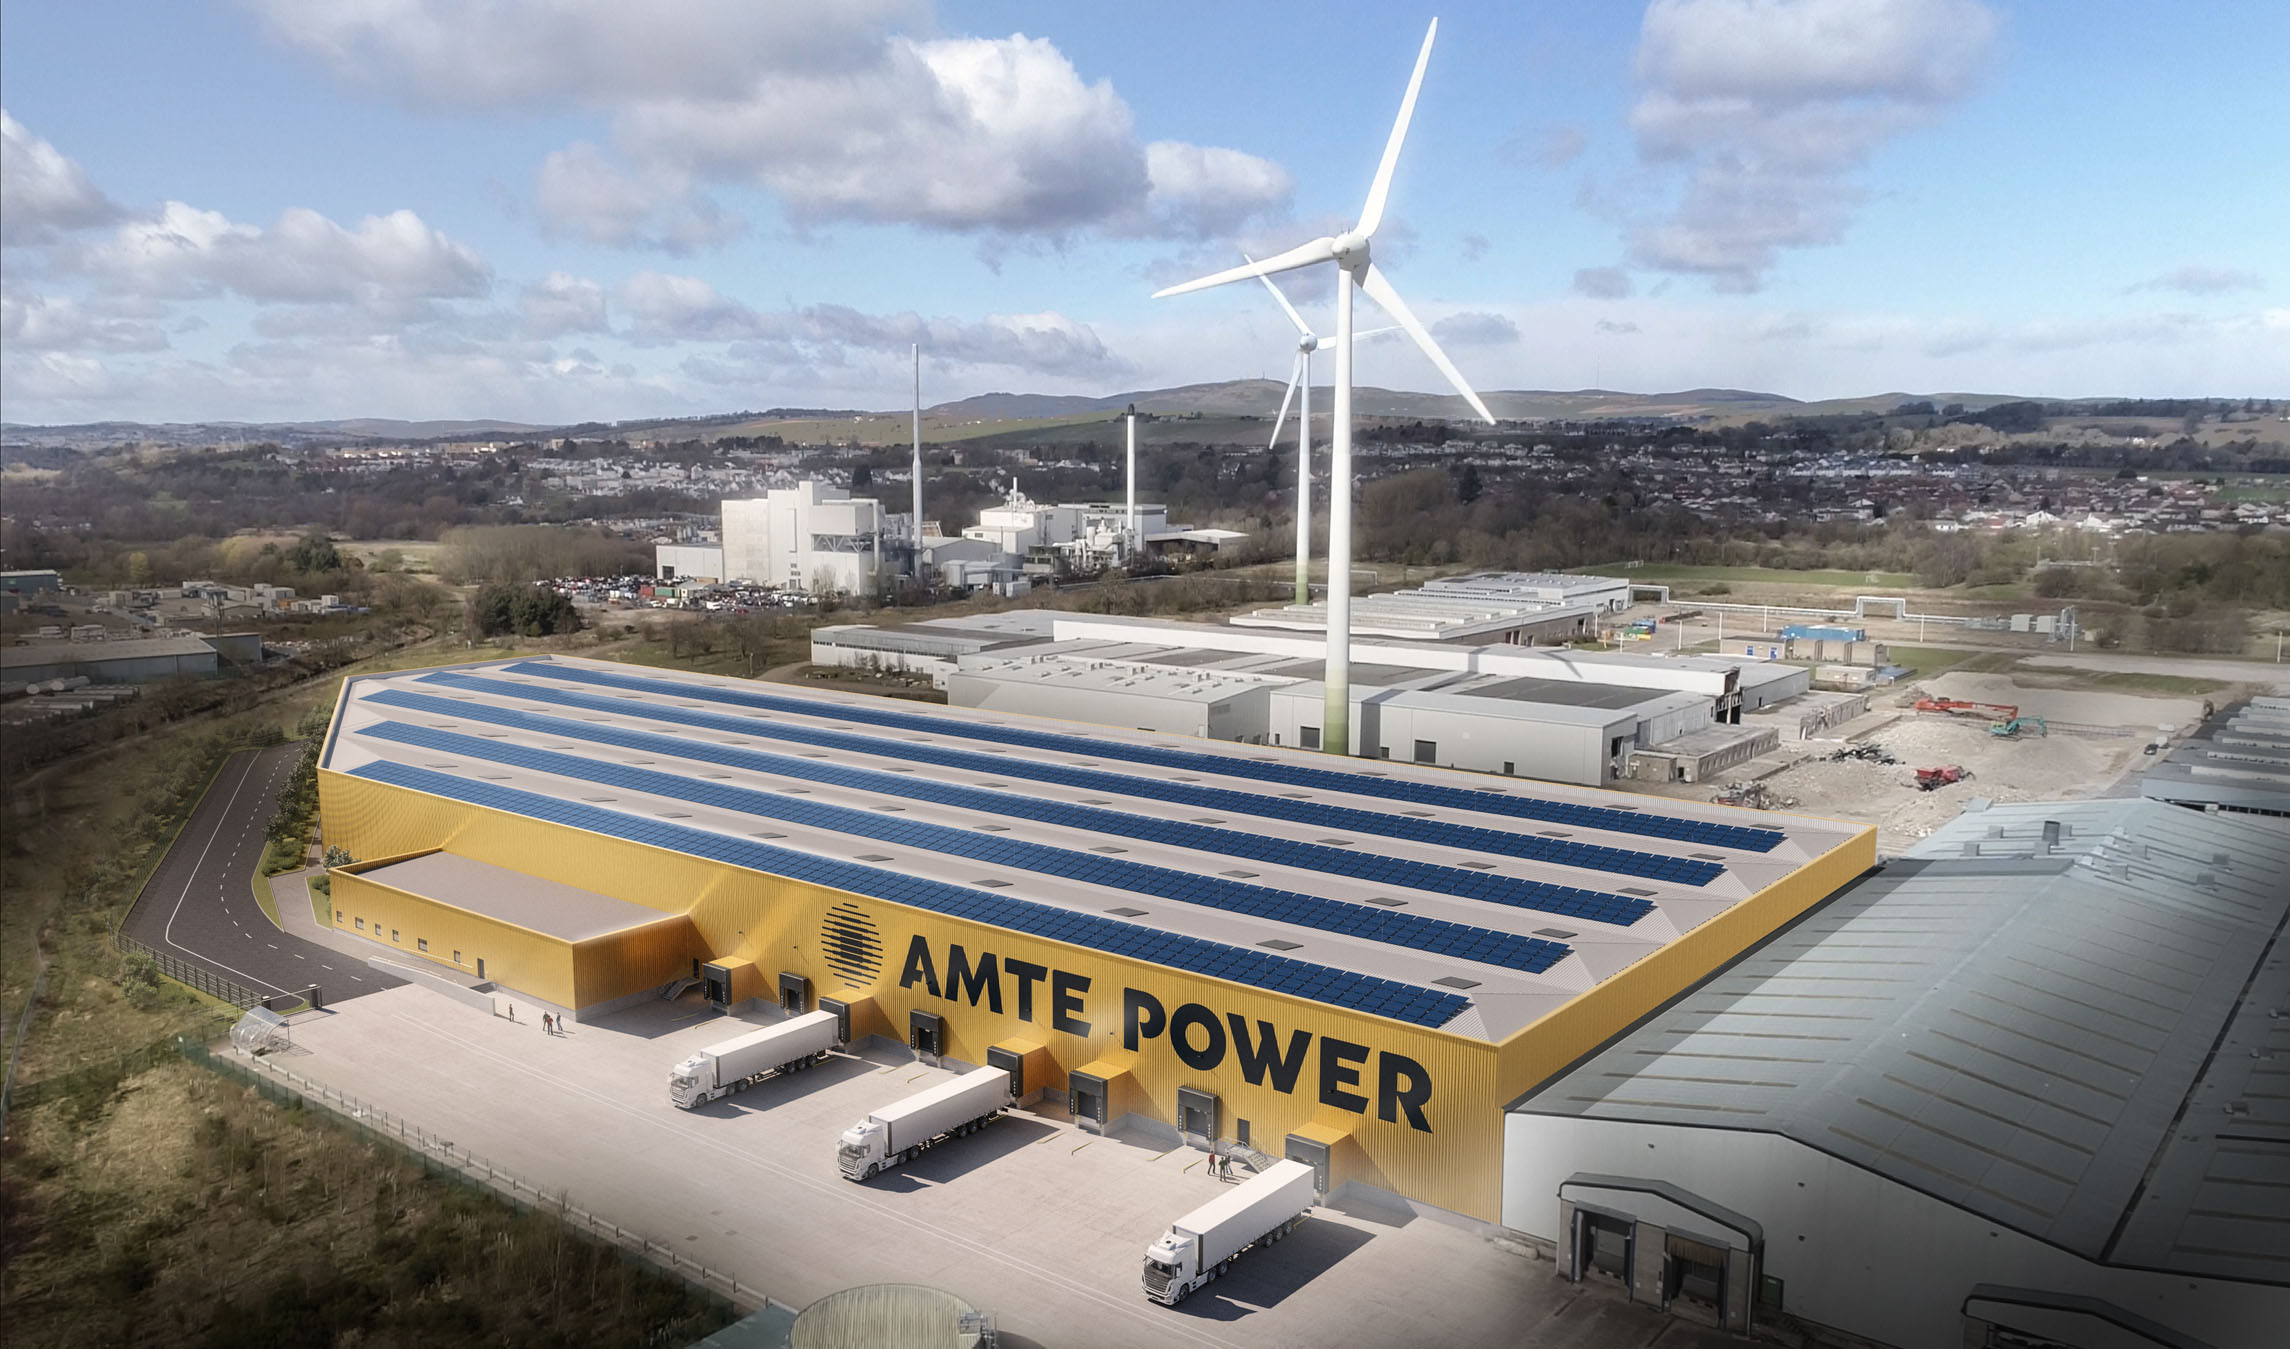 AMTE Power staves off administration with £1m bridging loan